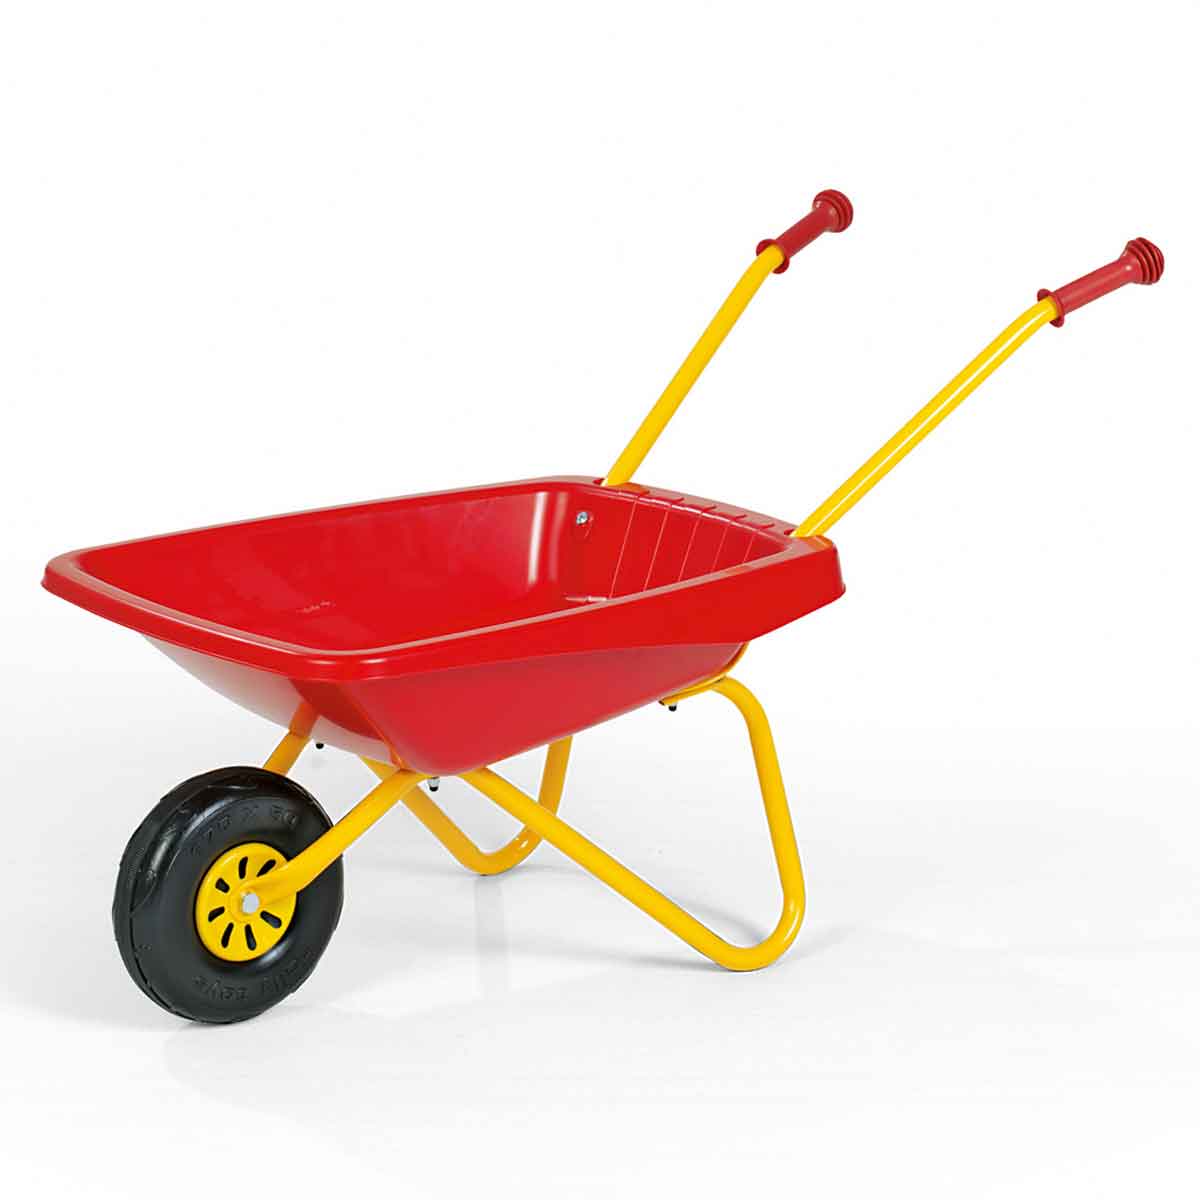 Rolly Toys Metal and Plastic Childrens Wheelbarrow, red